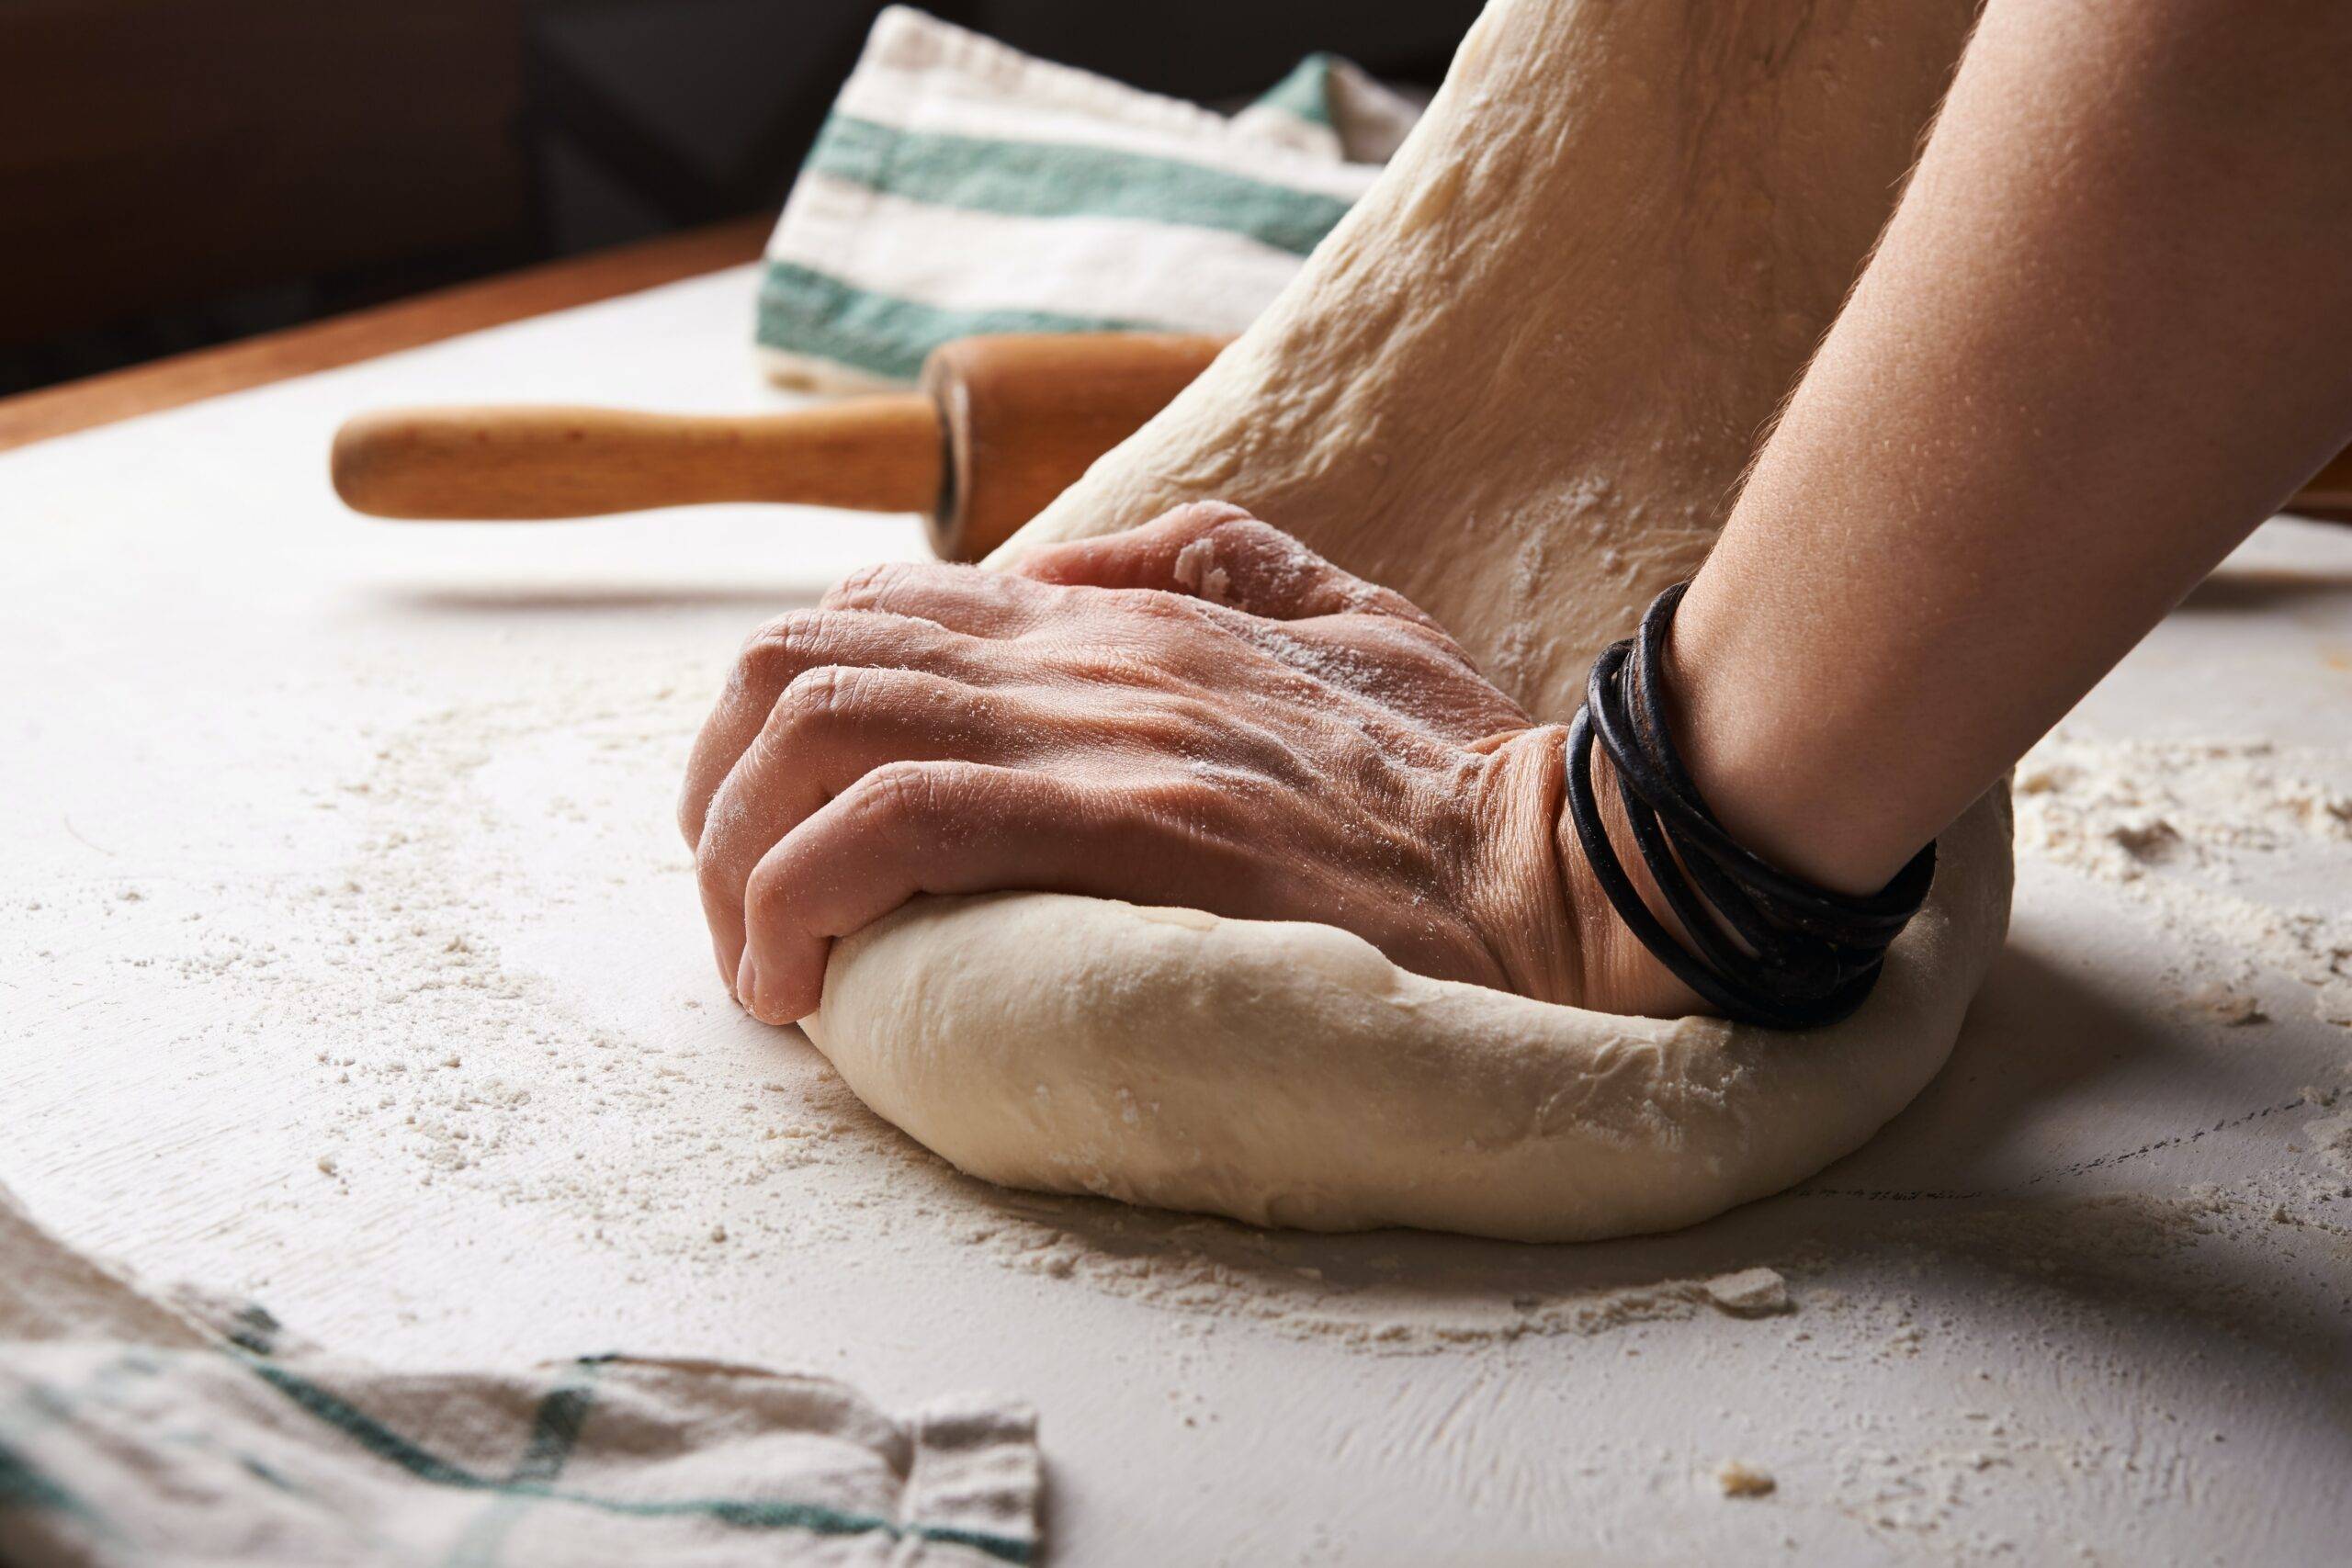 What Is the Essential Guide to Home Bread Baking